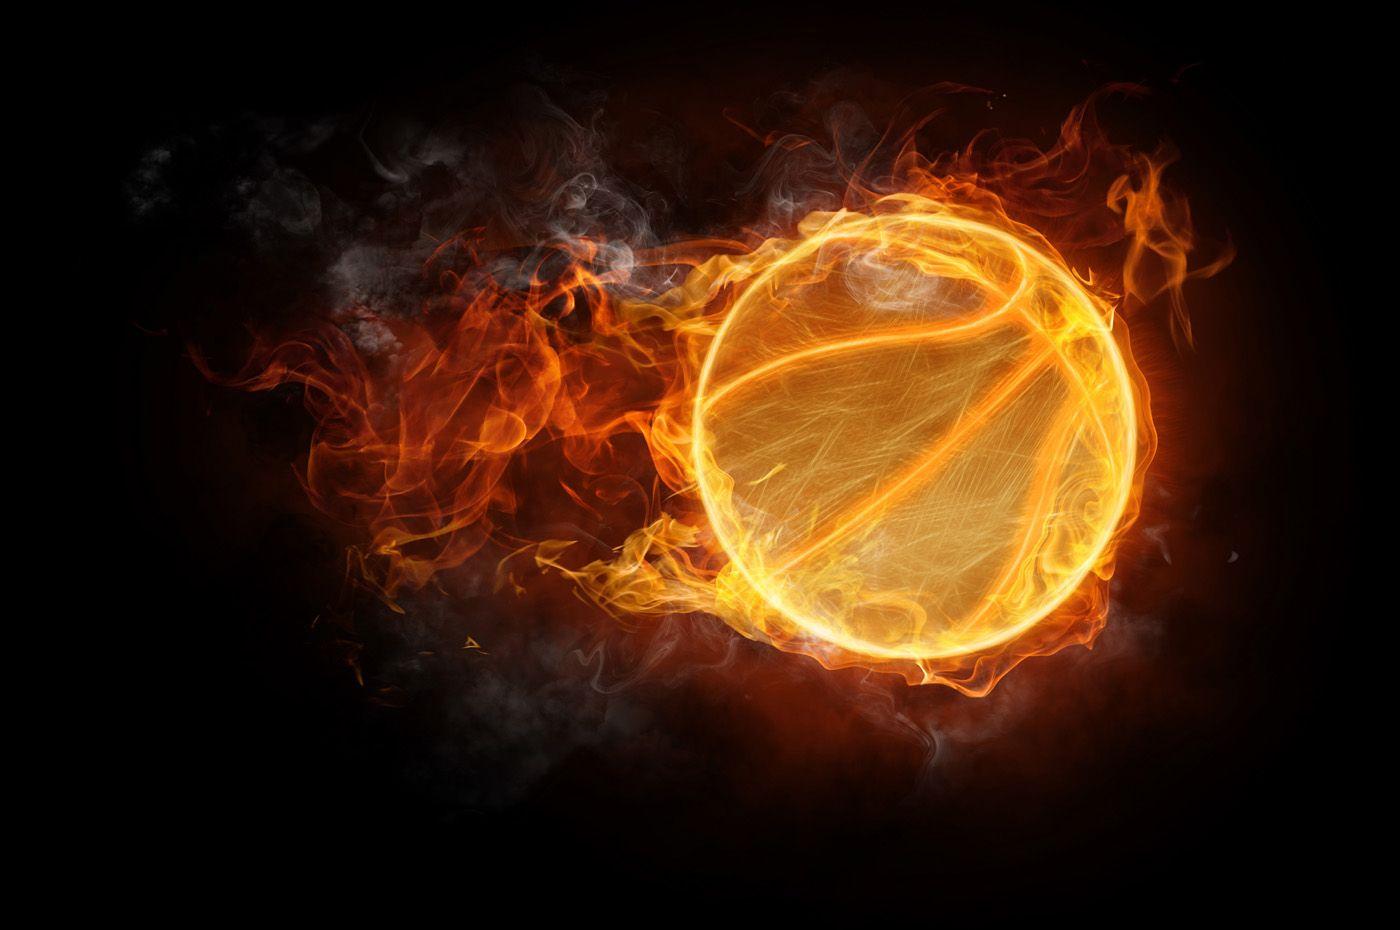 Fire Ball Pictures  Download Free Images on Unsplash